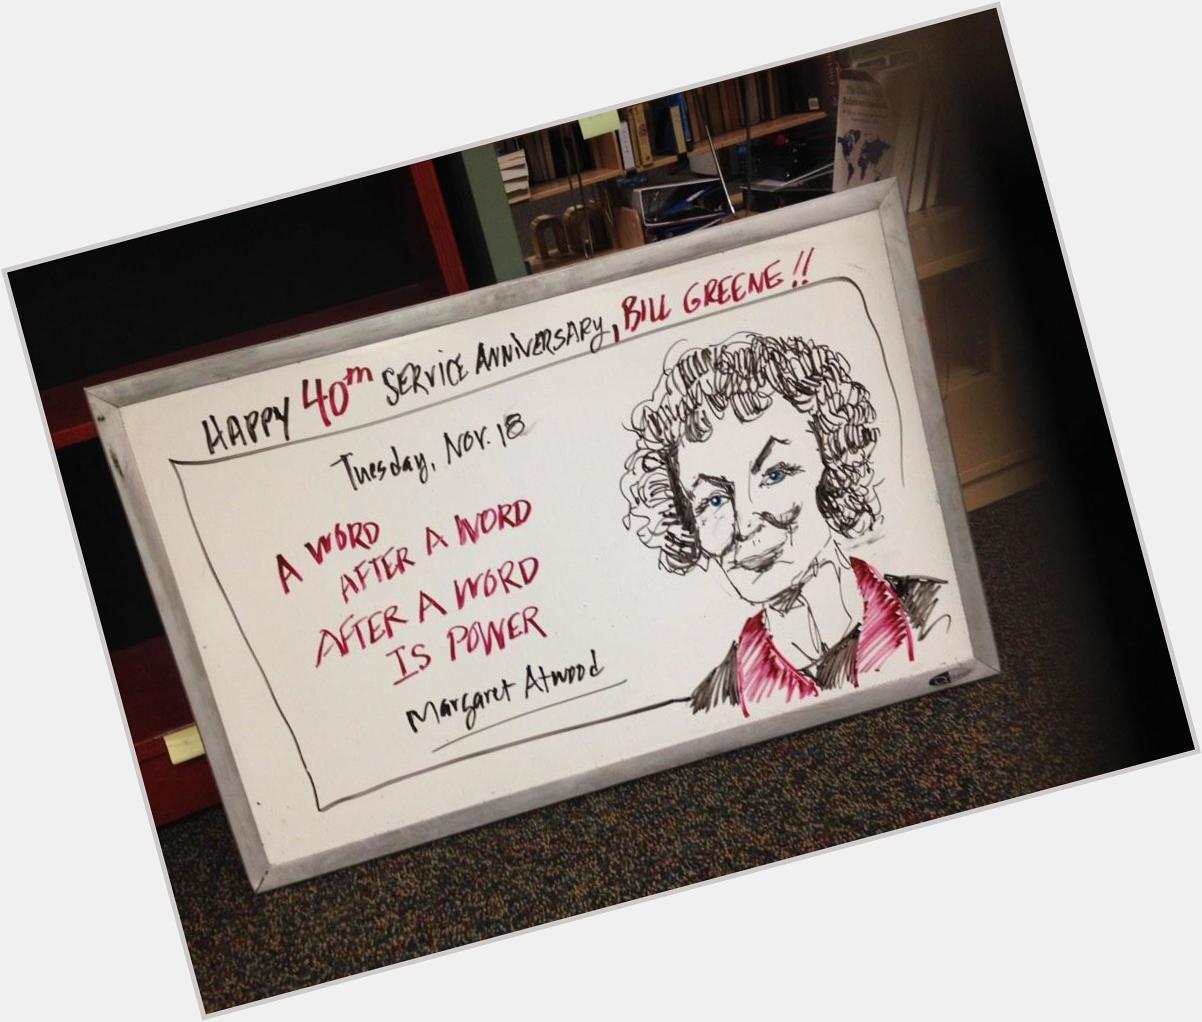 A word...after a word...after a word is power!! Happy 75th Margaret Atwood 